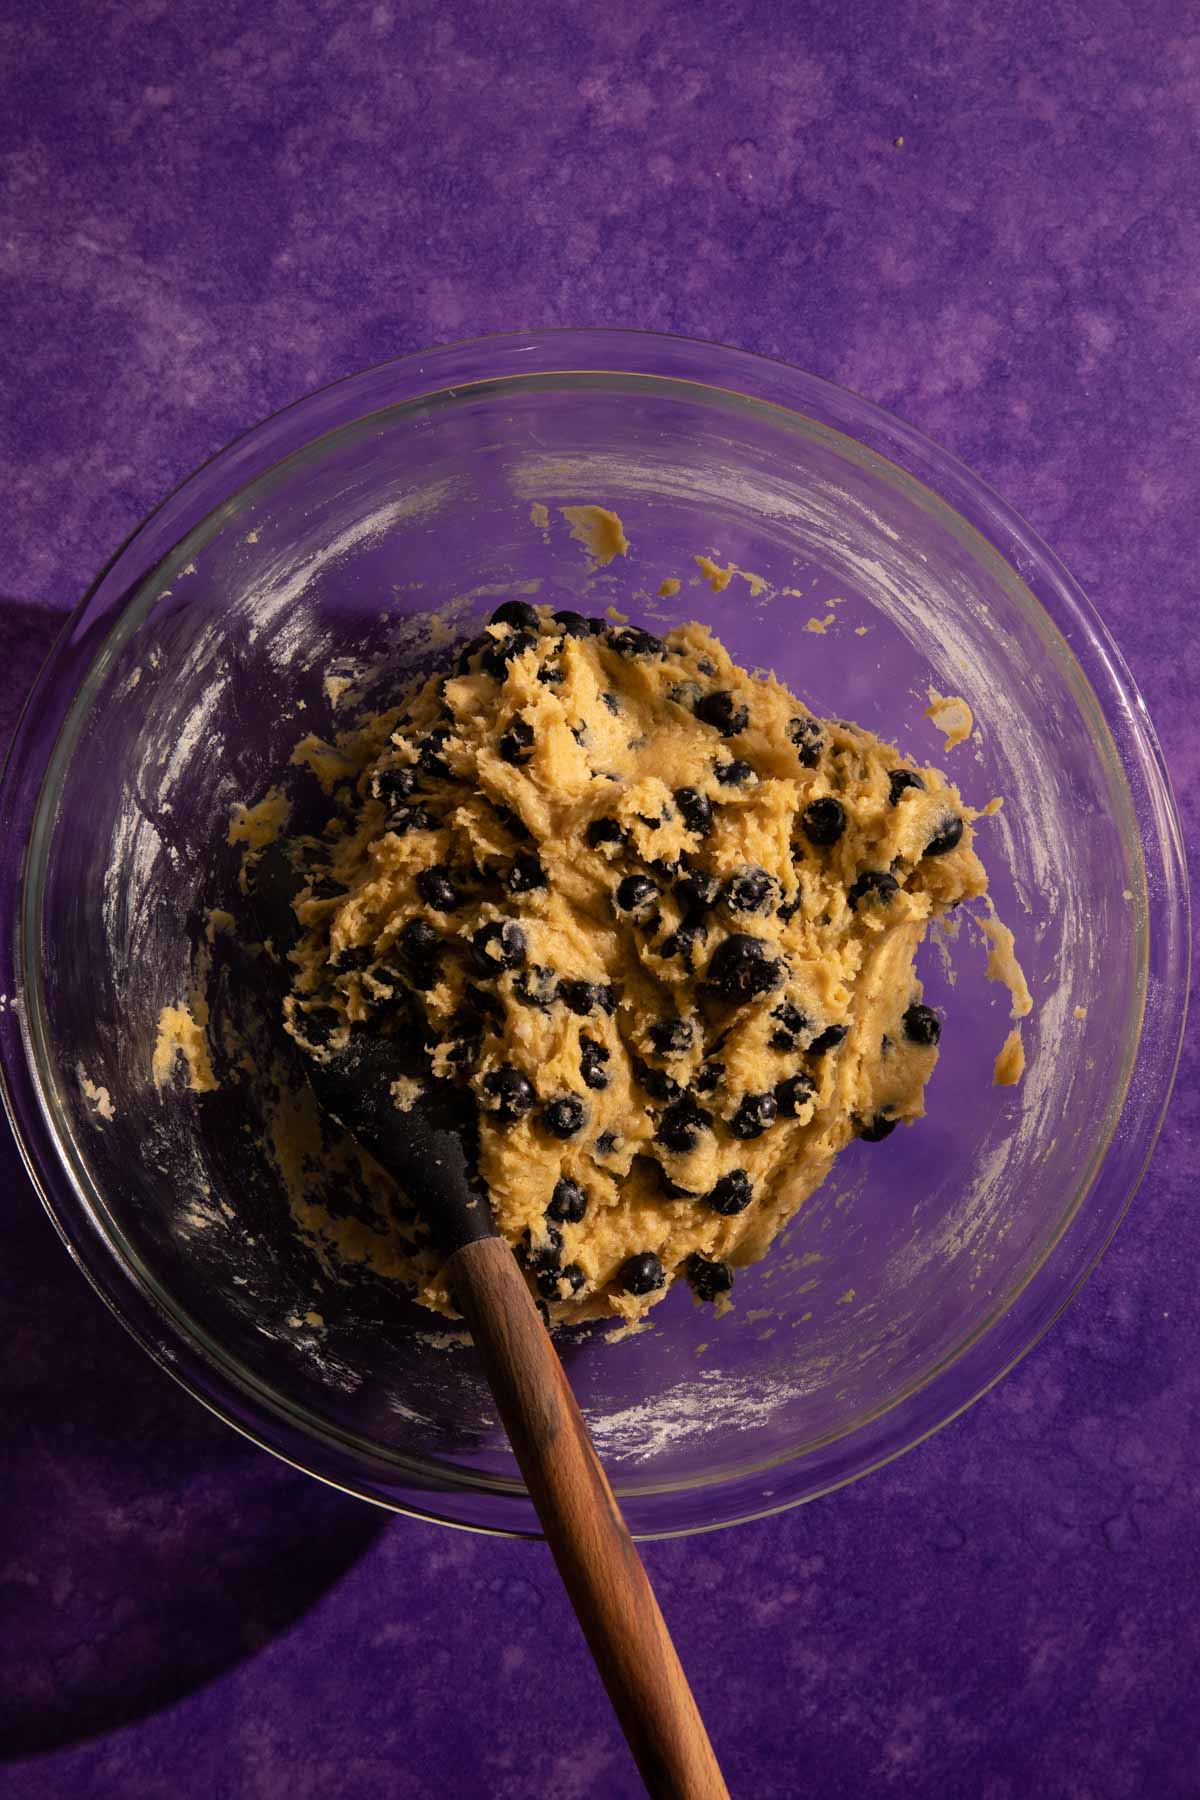 Blueberry muffin batter in a glass bowl with a spatula